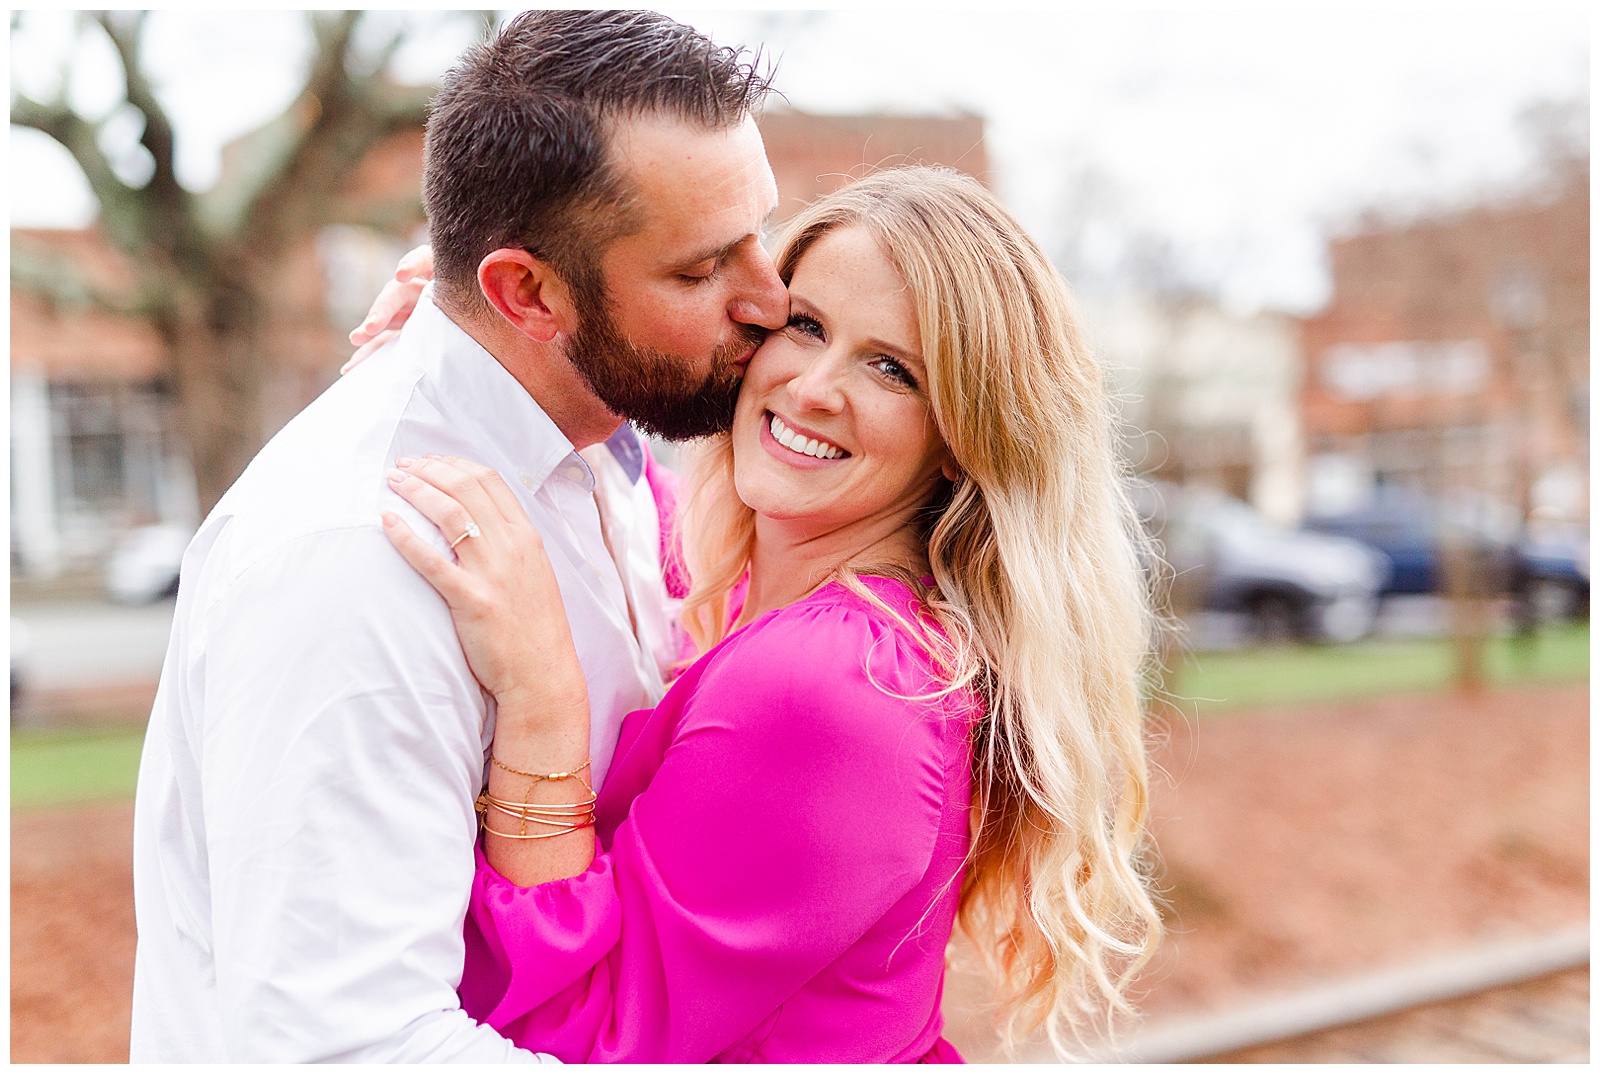 Adorable couple embracing in front of train tracks in downtown Waxhaw, NC Engagement Session with Bright Hot Pink Dress Outfit Ideas